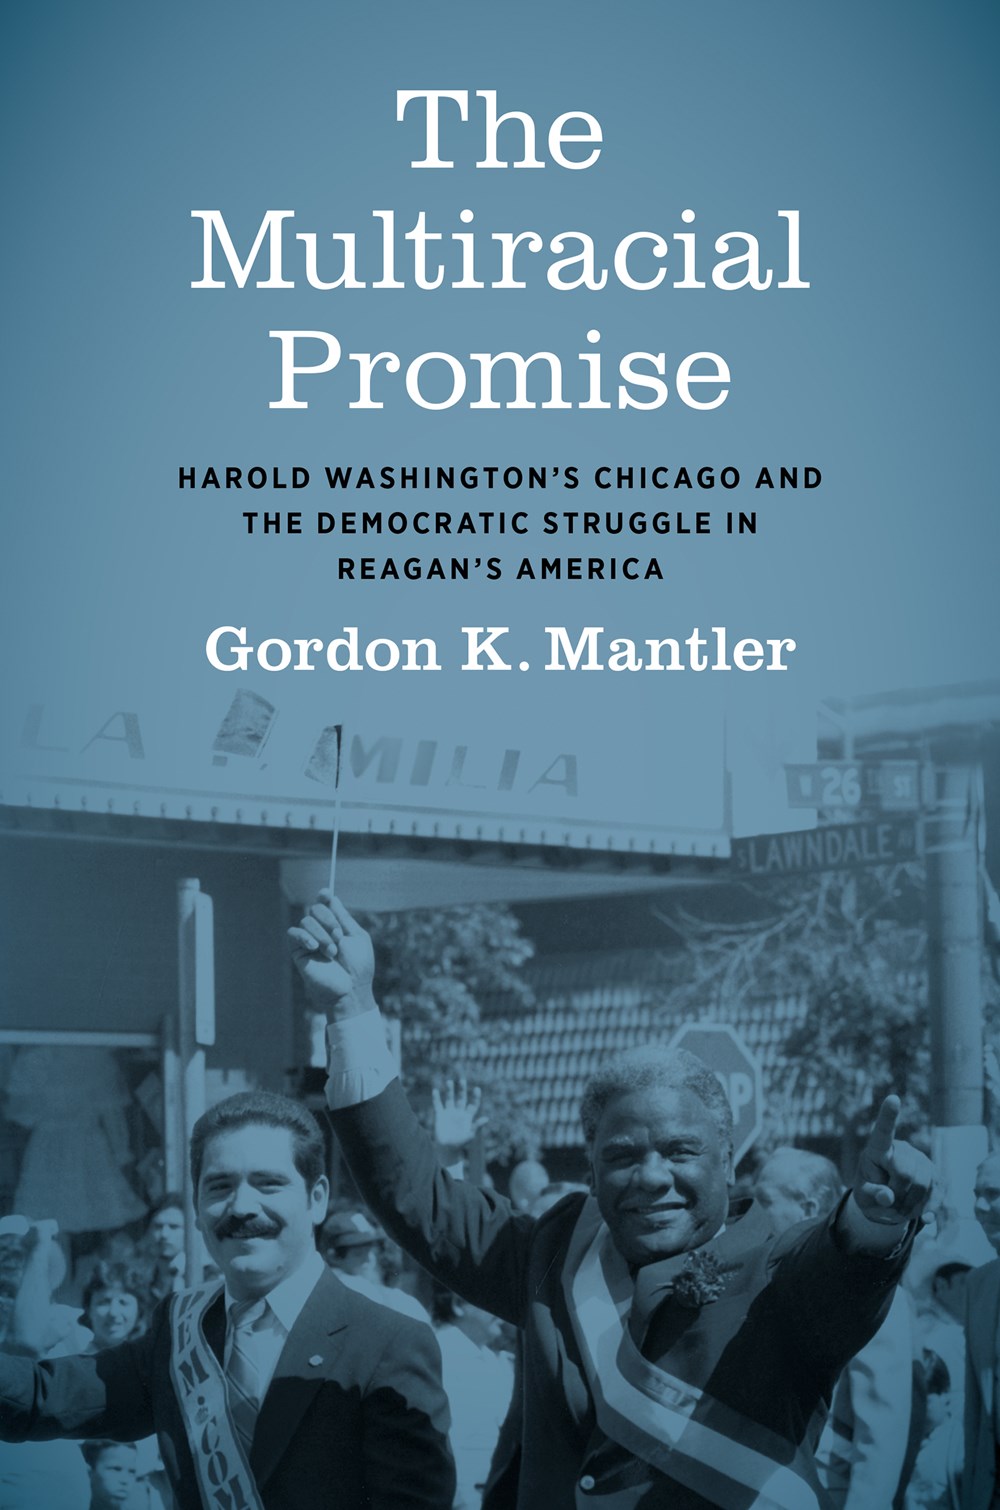 The Multiracial Promise: Harold Washington’s Chicago and the Democratic Struggle in Reagan’s America